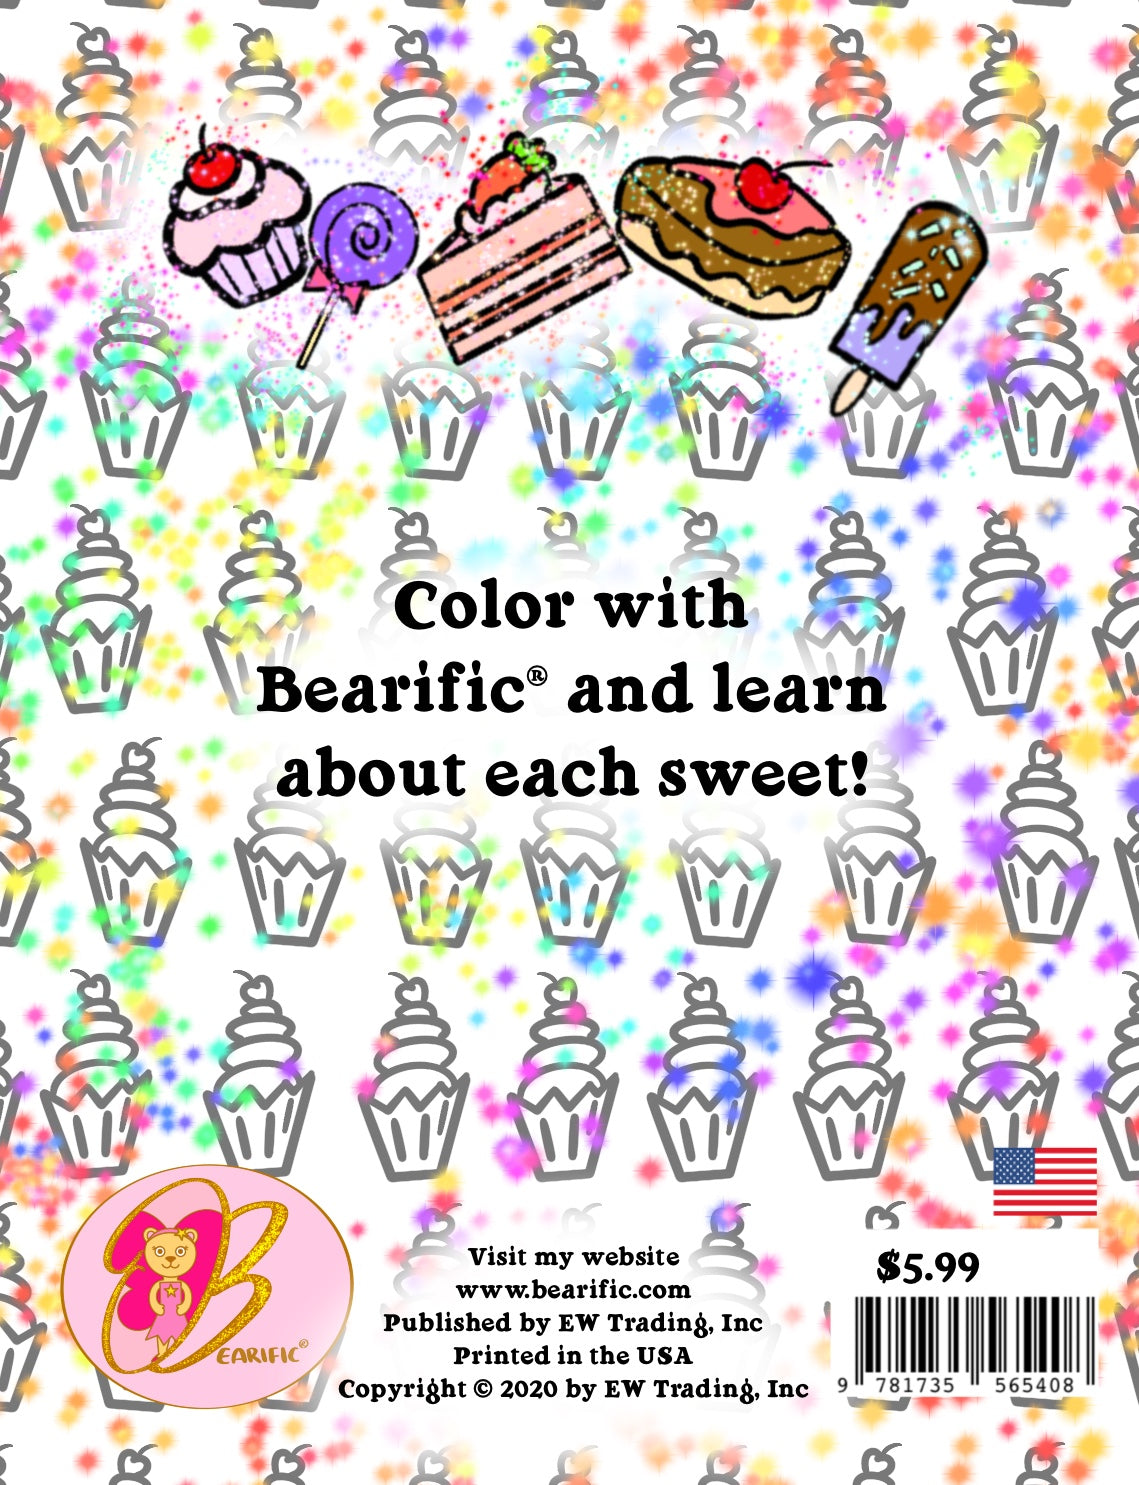 Bearific’s® Coloring Book: Sweets Edition